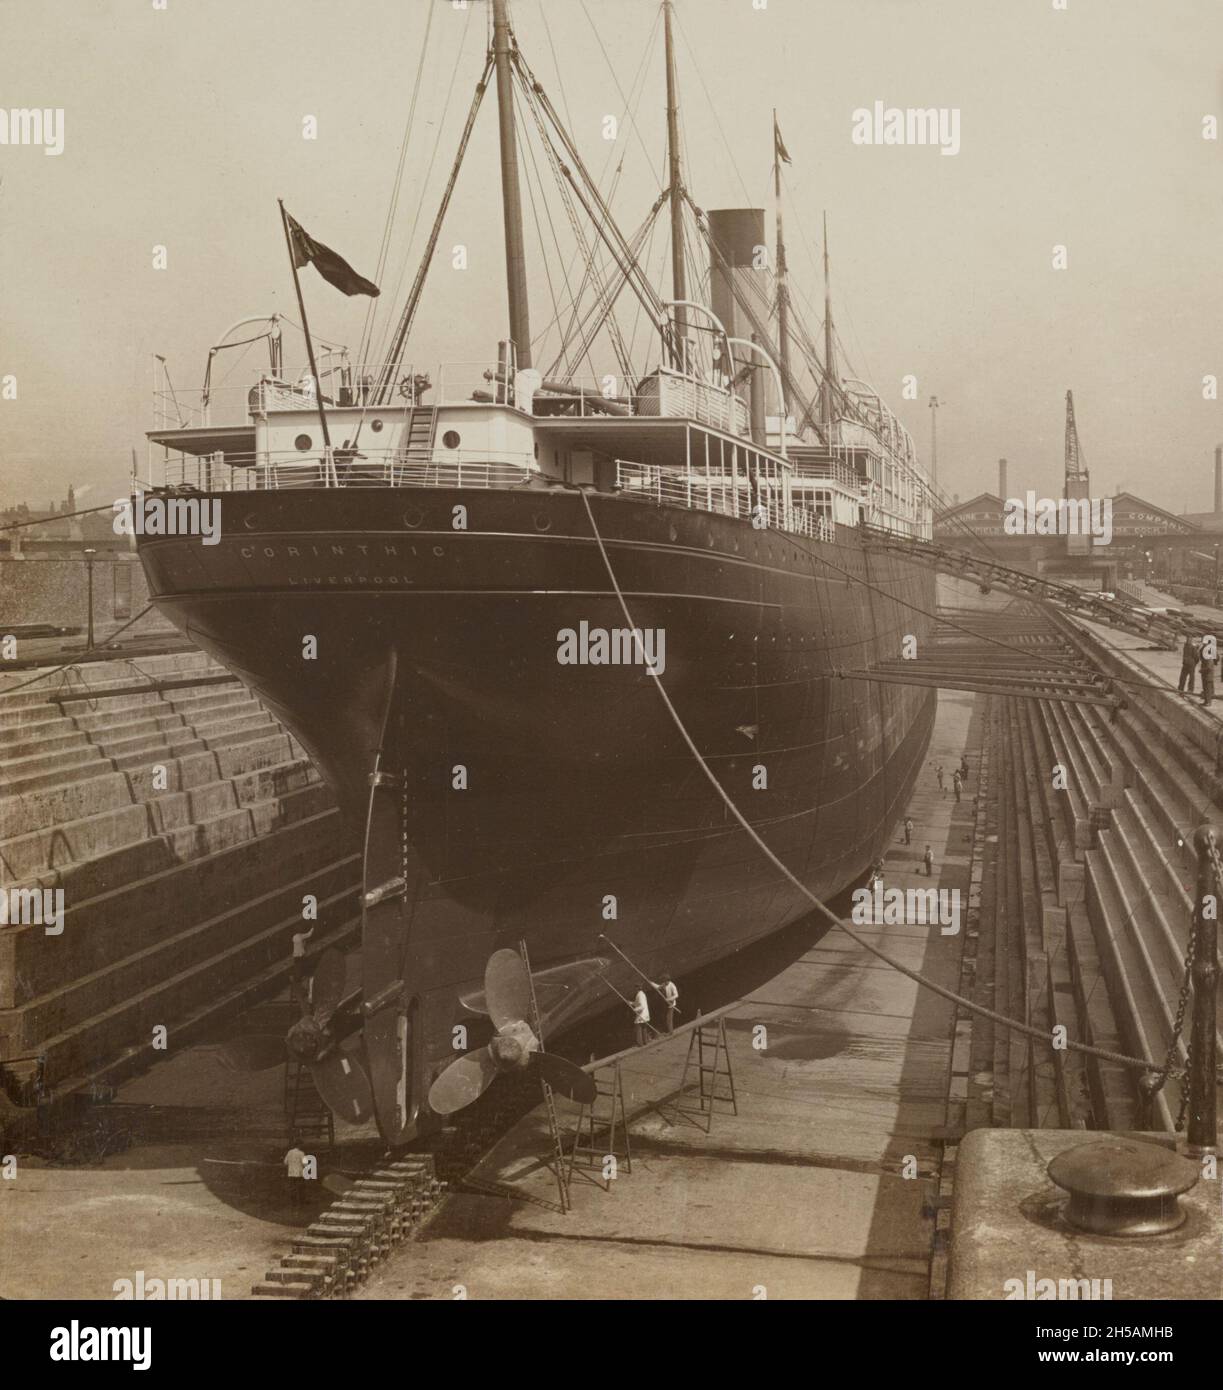 Vintage photo dated 1903 of the passenger liner SS Corinthic in dry dock for maintenance at the city of Liverpool in England.  Built by Harland and Wolff in Belfast she was launched in 1902 for the British shipping companies White Star Line and Shaw, Savill & Albion Line. She operated as a combined cargo and passenger liner from Liverpool to New Zealand. The SS Corinthic was scrapped in 1931 Stock Photo